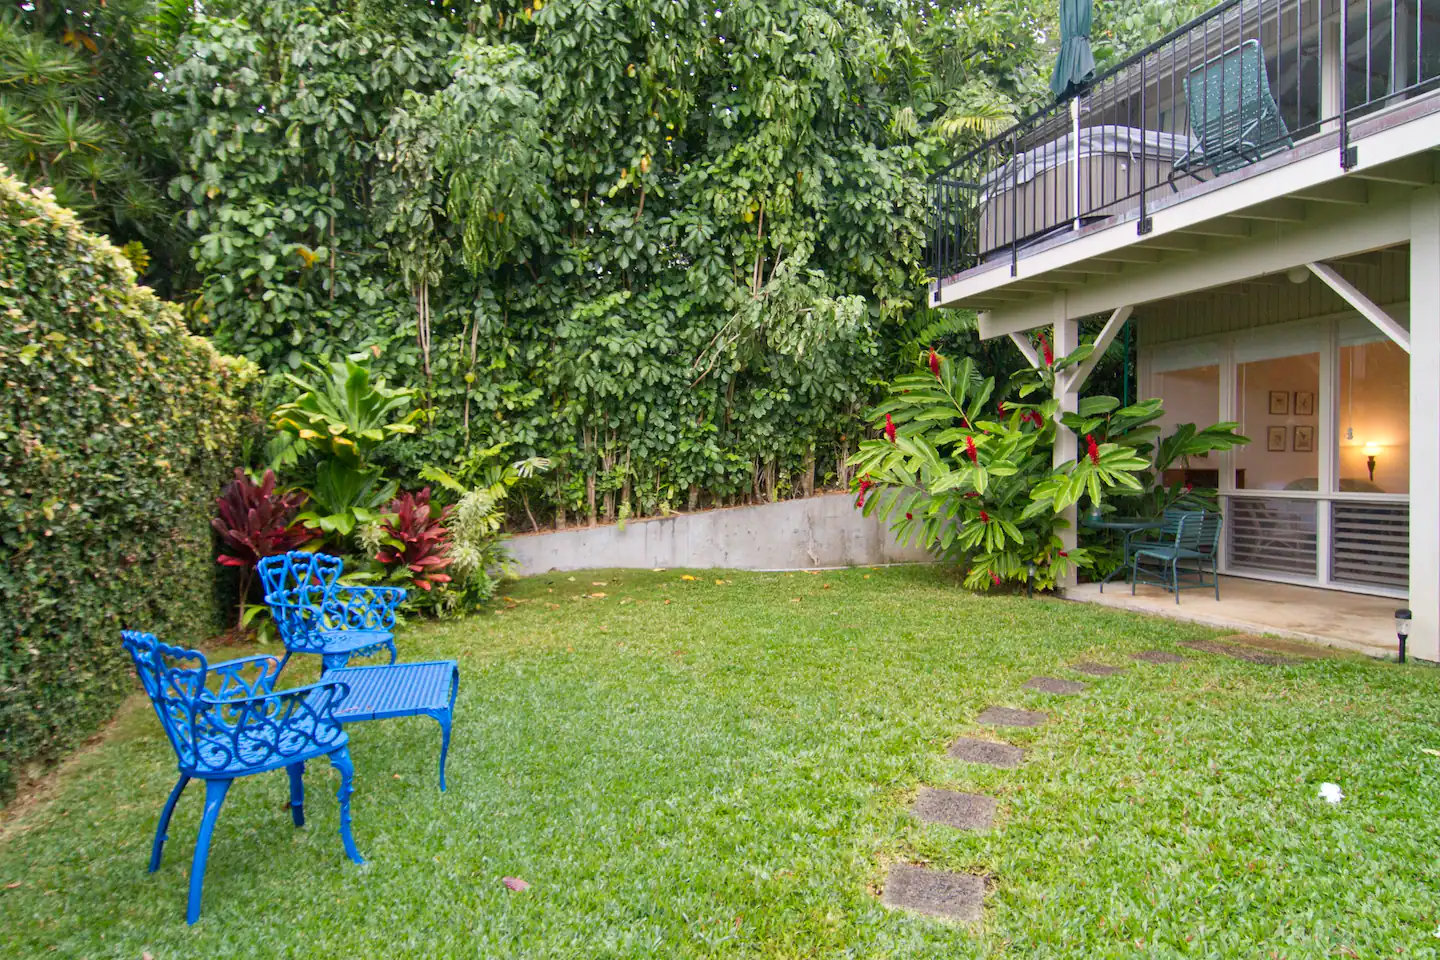 Manoa Rainforest Studio, one of the best Airbnbs on Oahu